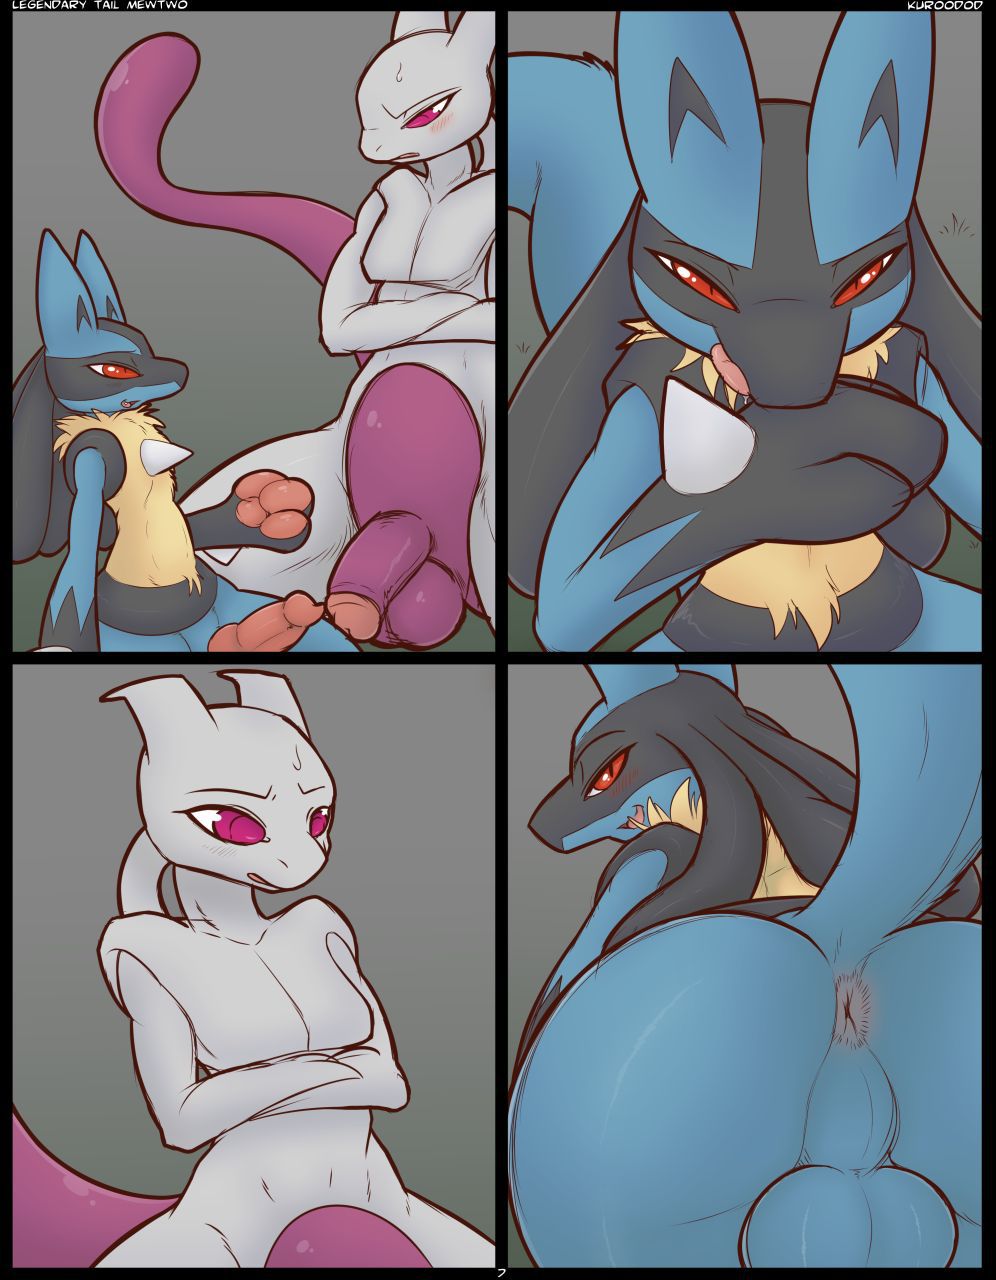 Legendary Tail 2 - Mewtwo by Kuroodod (Ongoing) 8